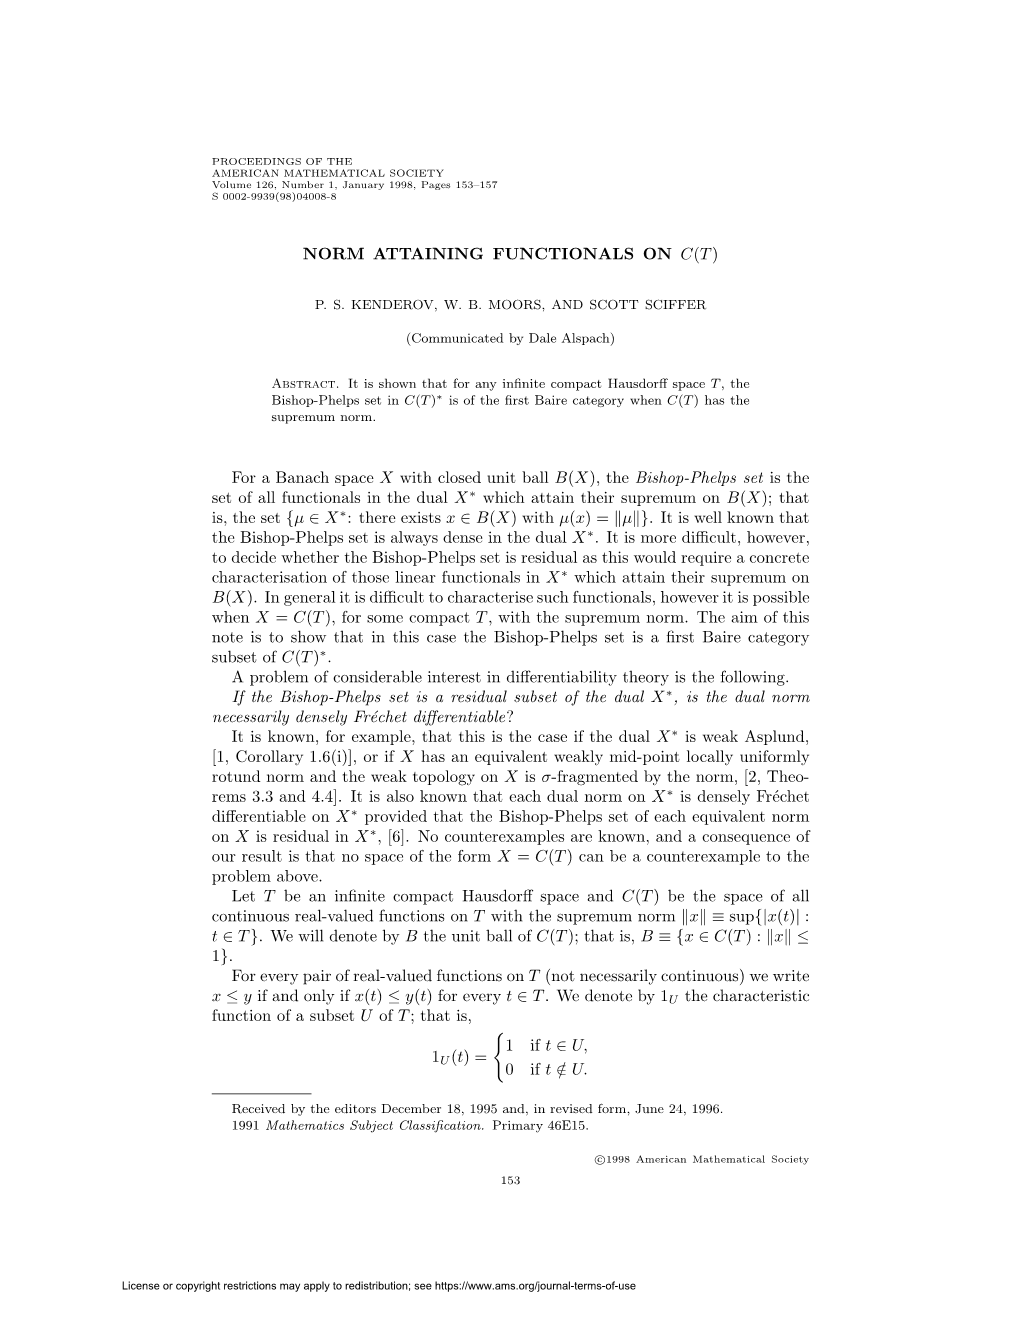 Norm Attaining Functionals on C(T)